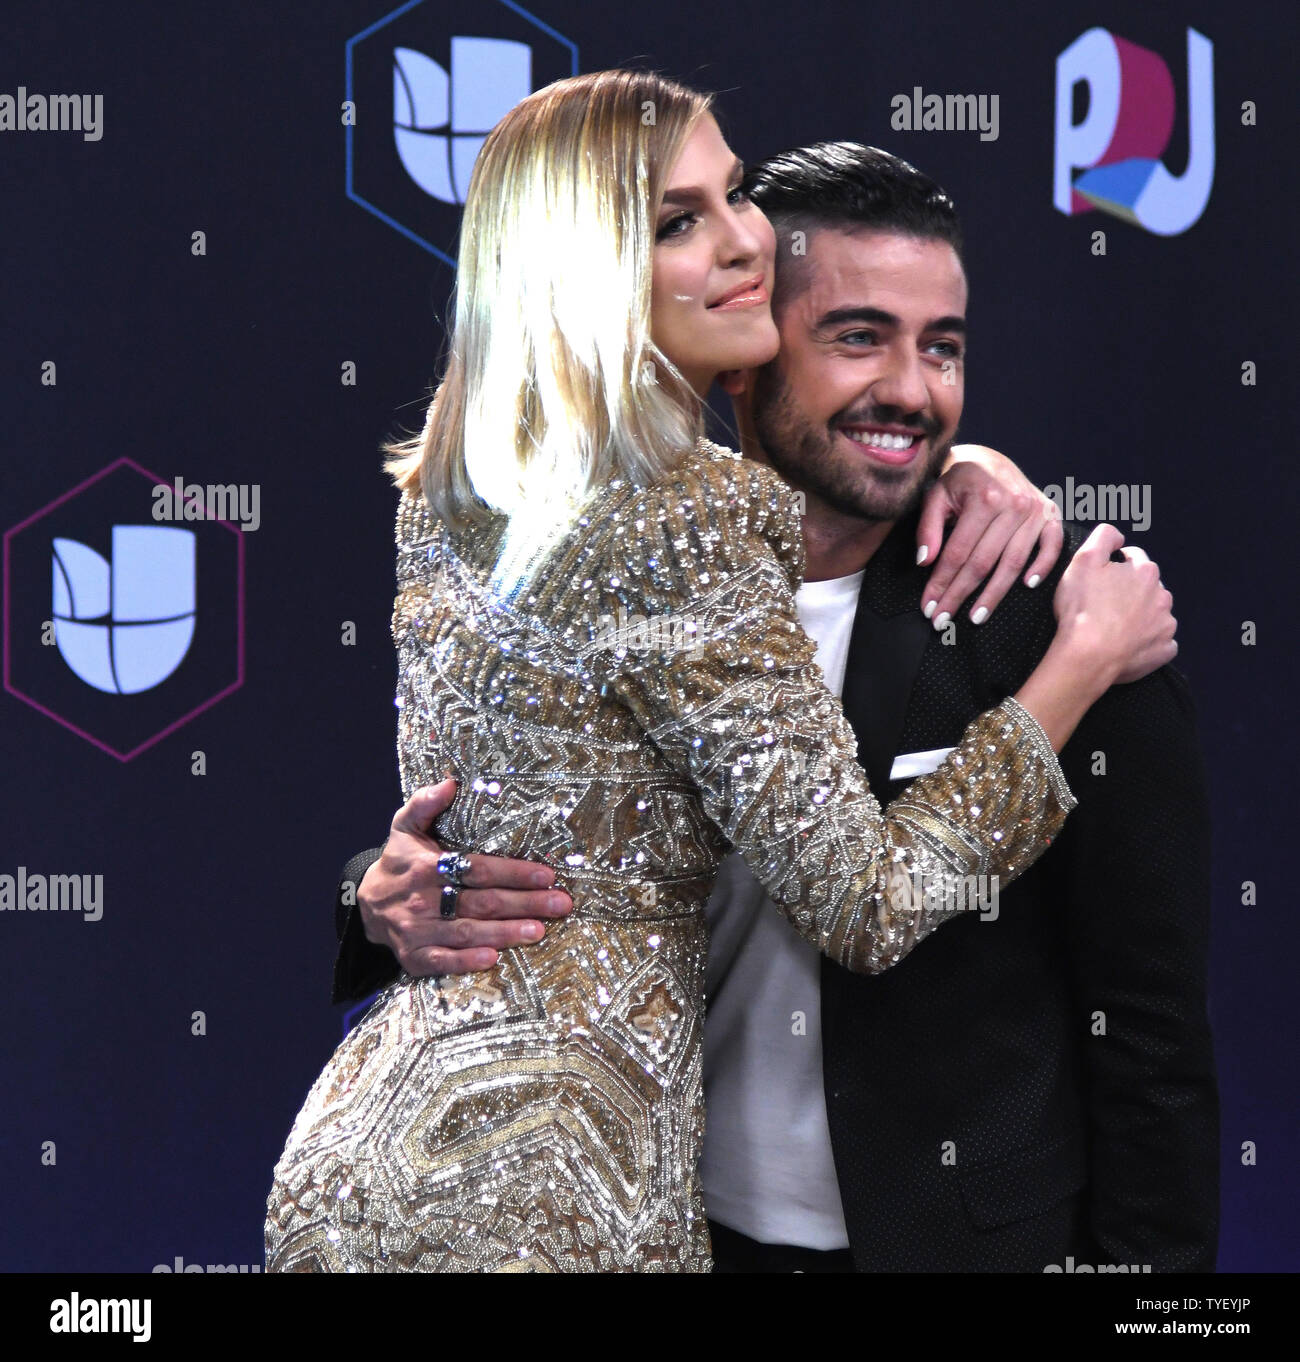 Daniela Di Giacomo (L) and Borja Voces walk the red carpet at the 2017  Premios Juventud event at the Wasco Center, University of Miami, Miami,  Florida on July 6, 2017. Photo by